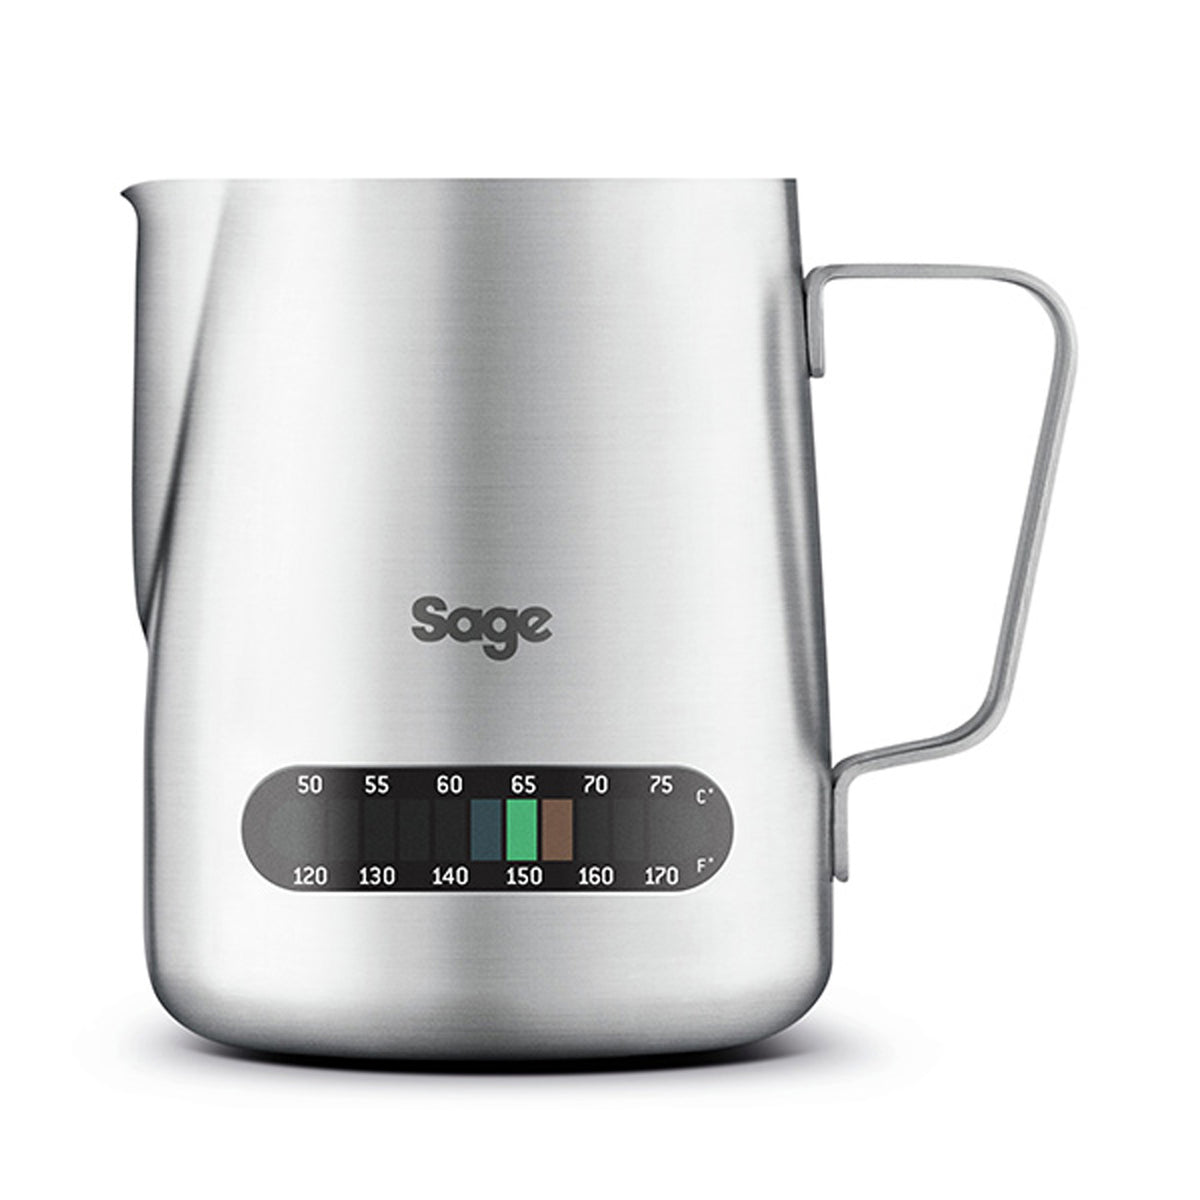 Sage the Temp Control 480ml Milk Jug with Indicator Strip - Stainless Steel | SES003BSS0NEU1 from Sage - DID Electrical